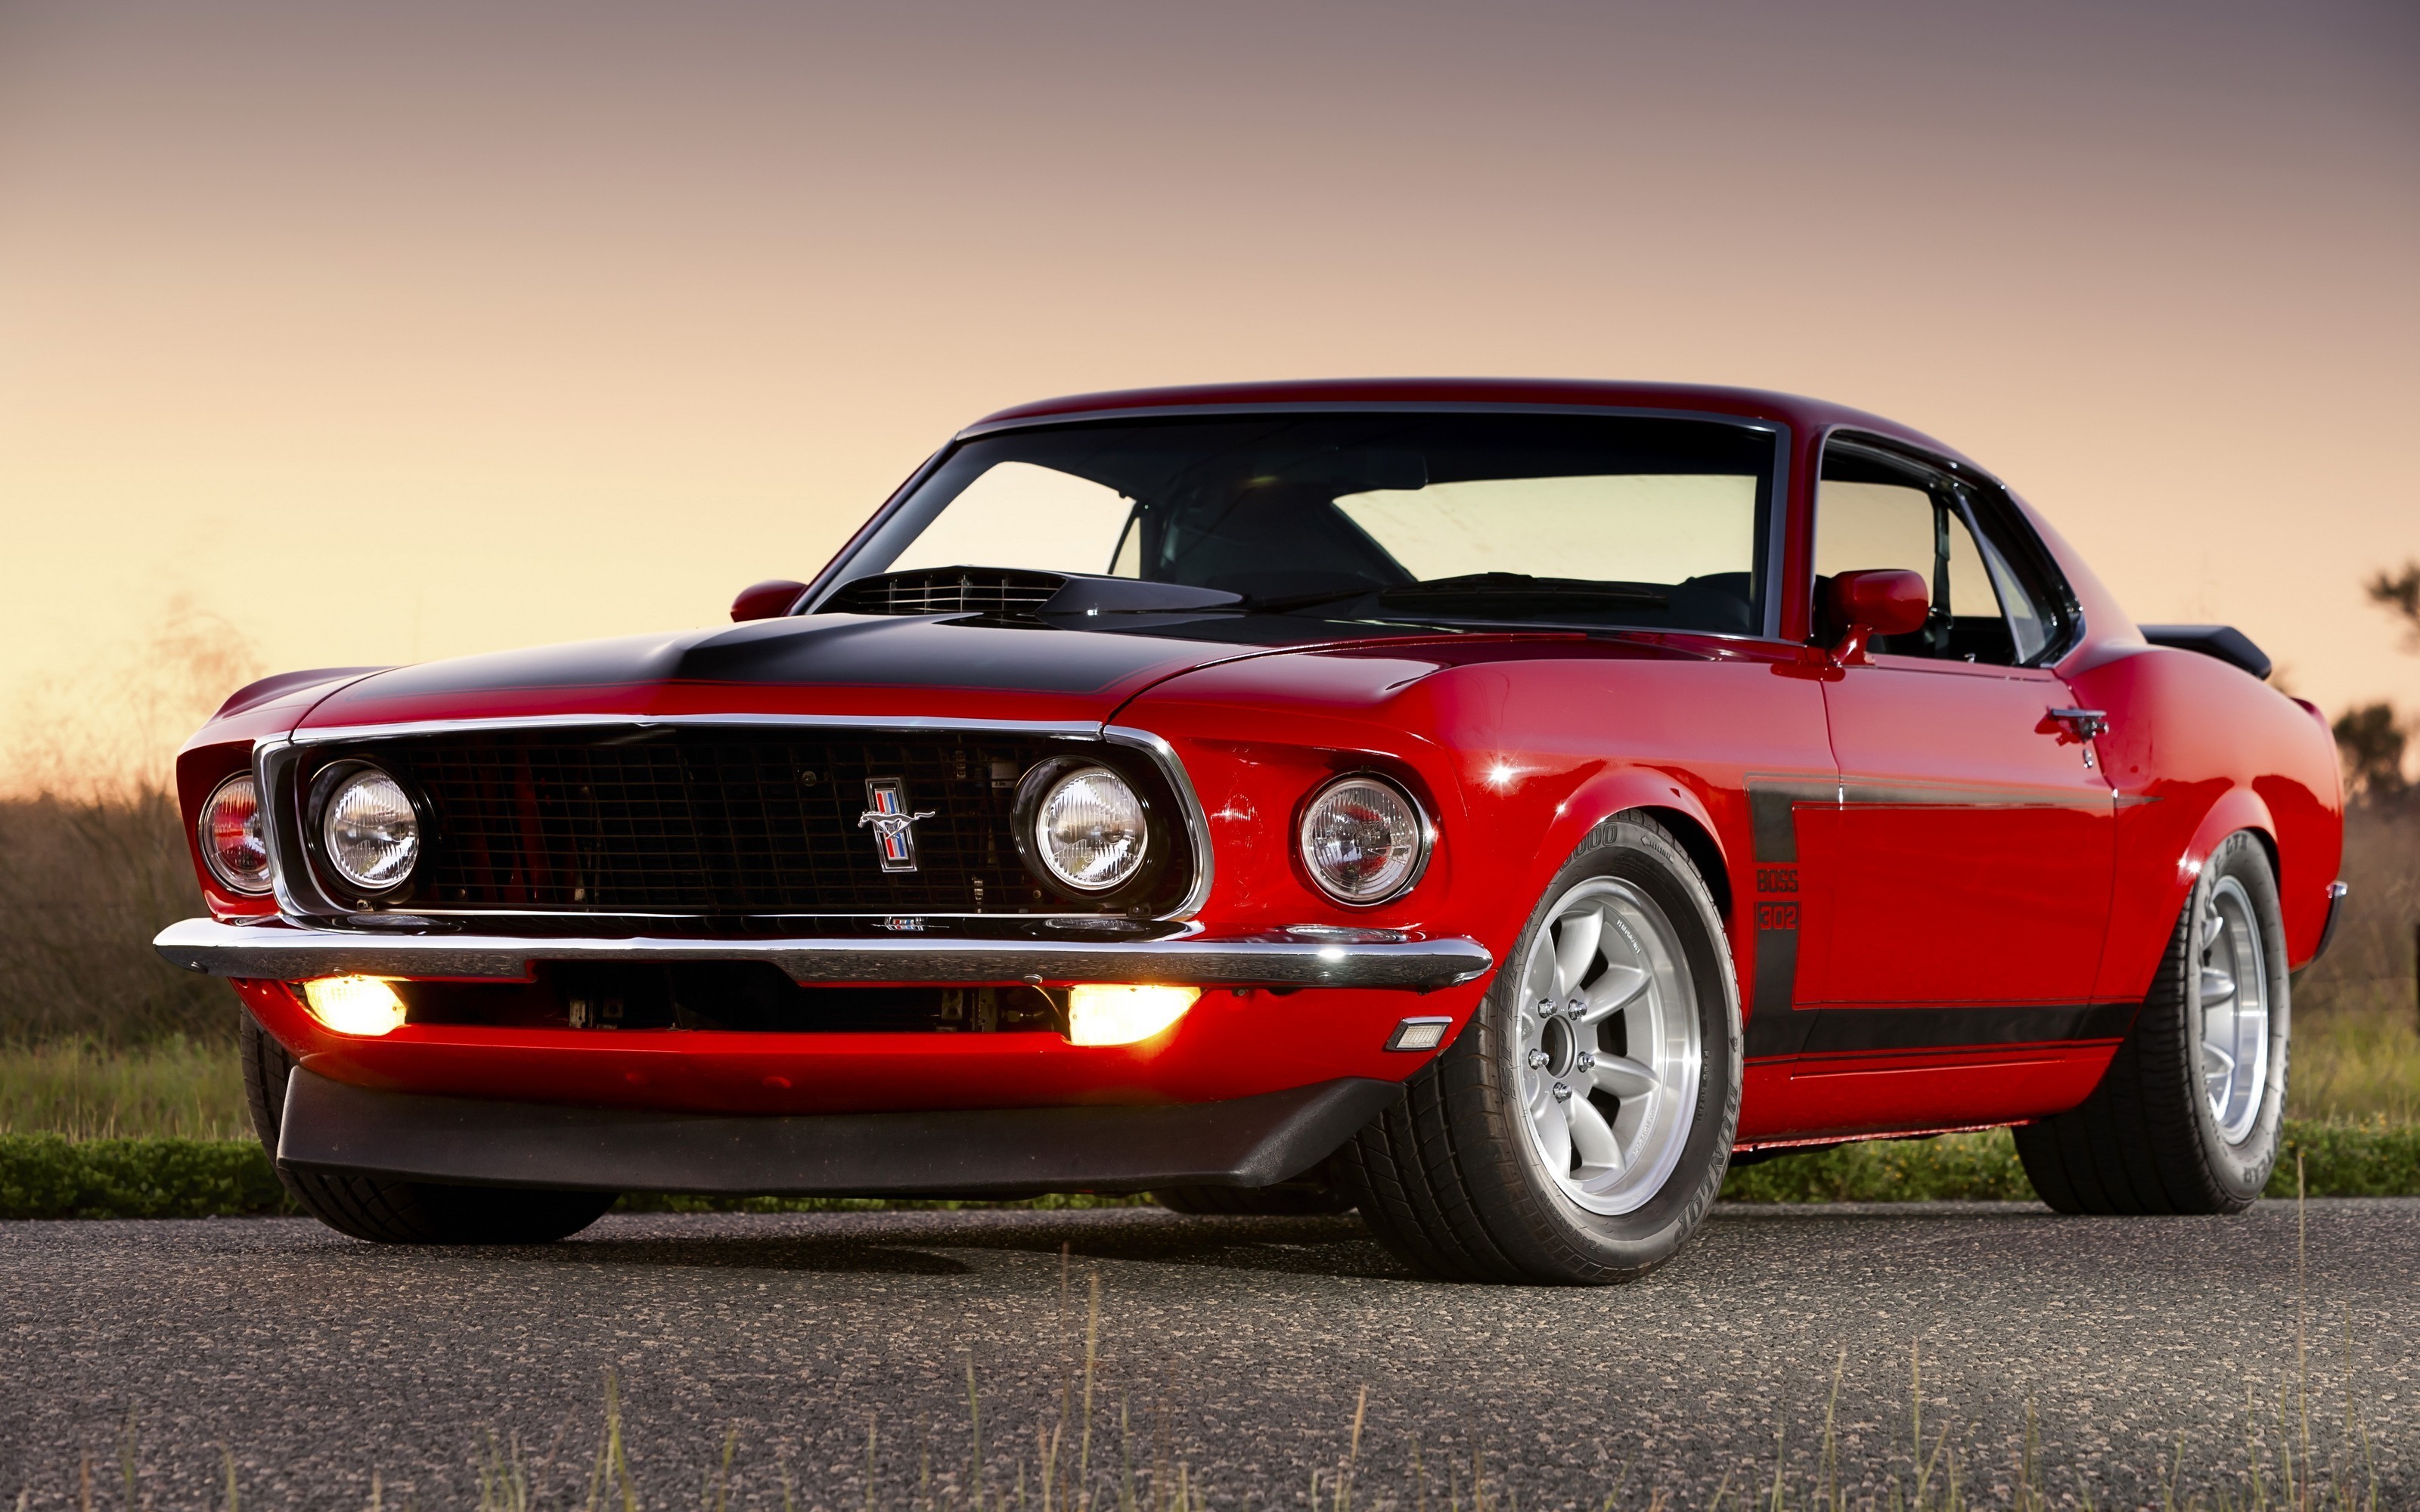 3200x2000 1920x1200 4 photos of the "5 Best Of Muscle Car Wallpaper"